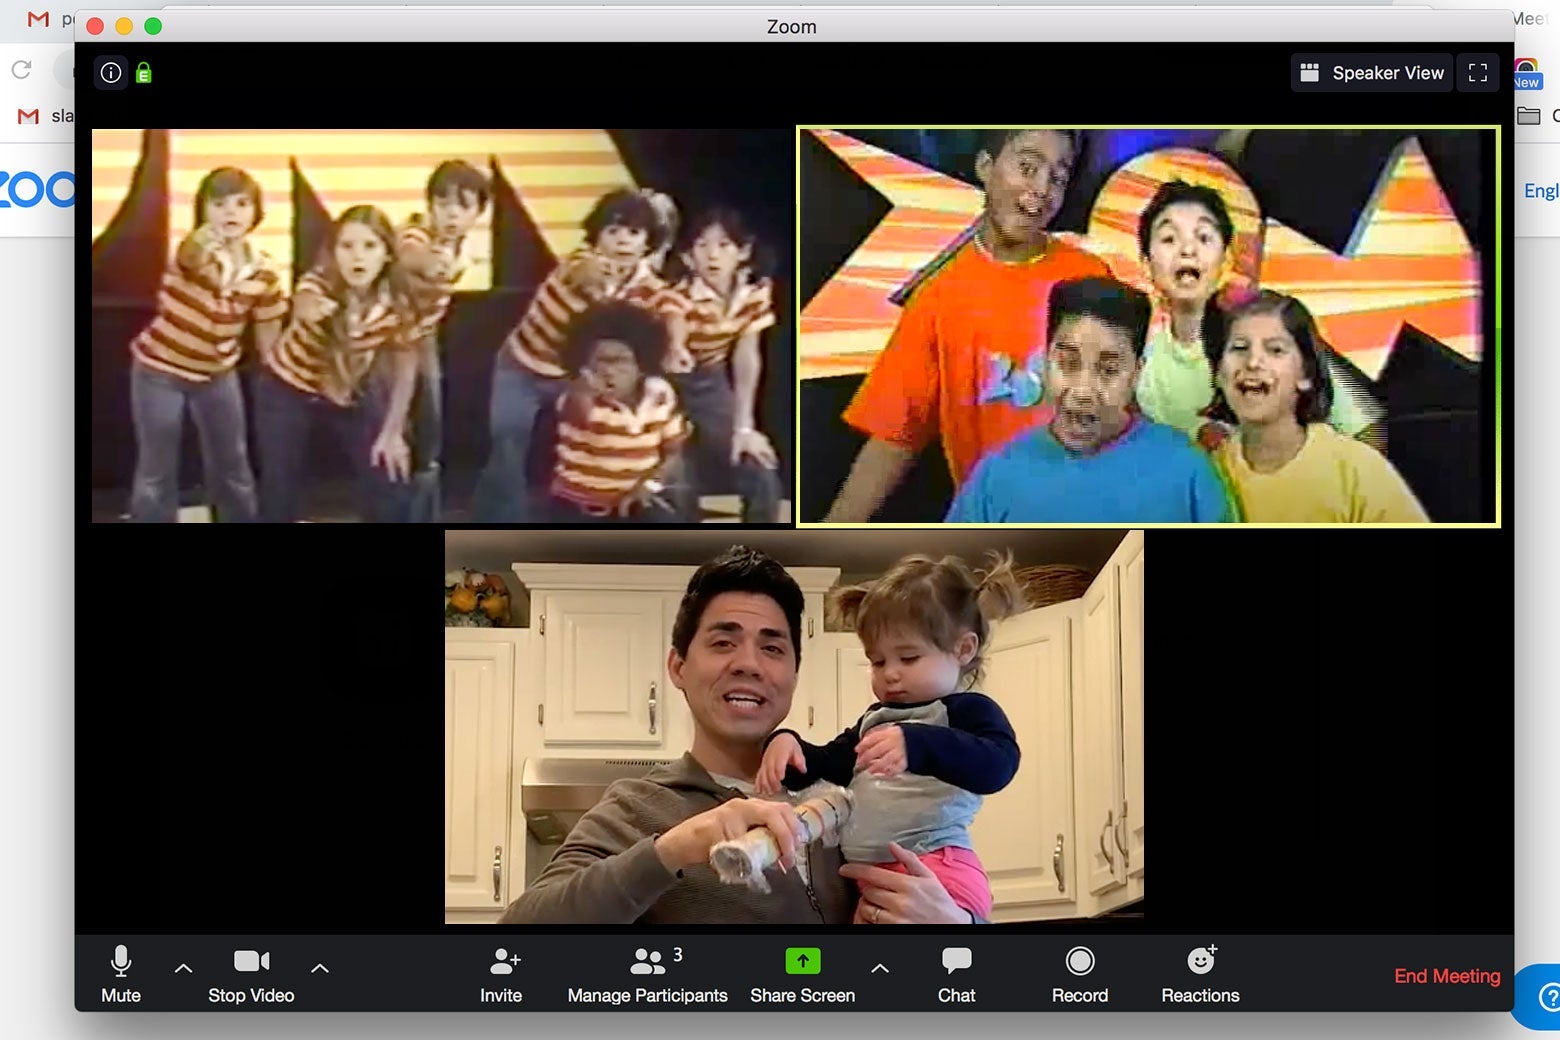 A mock screenshot of a Zoom videoconference among Zoomers from the 1970s, 1990s, and today.